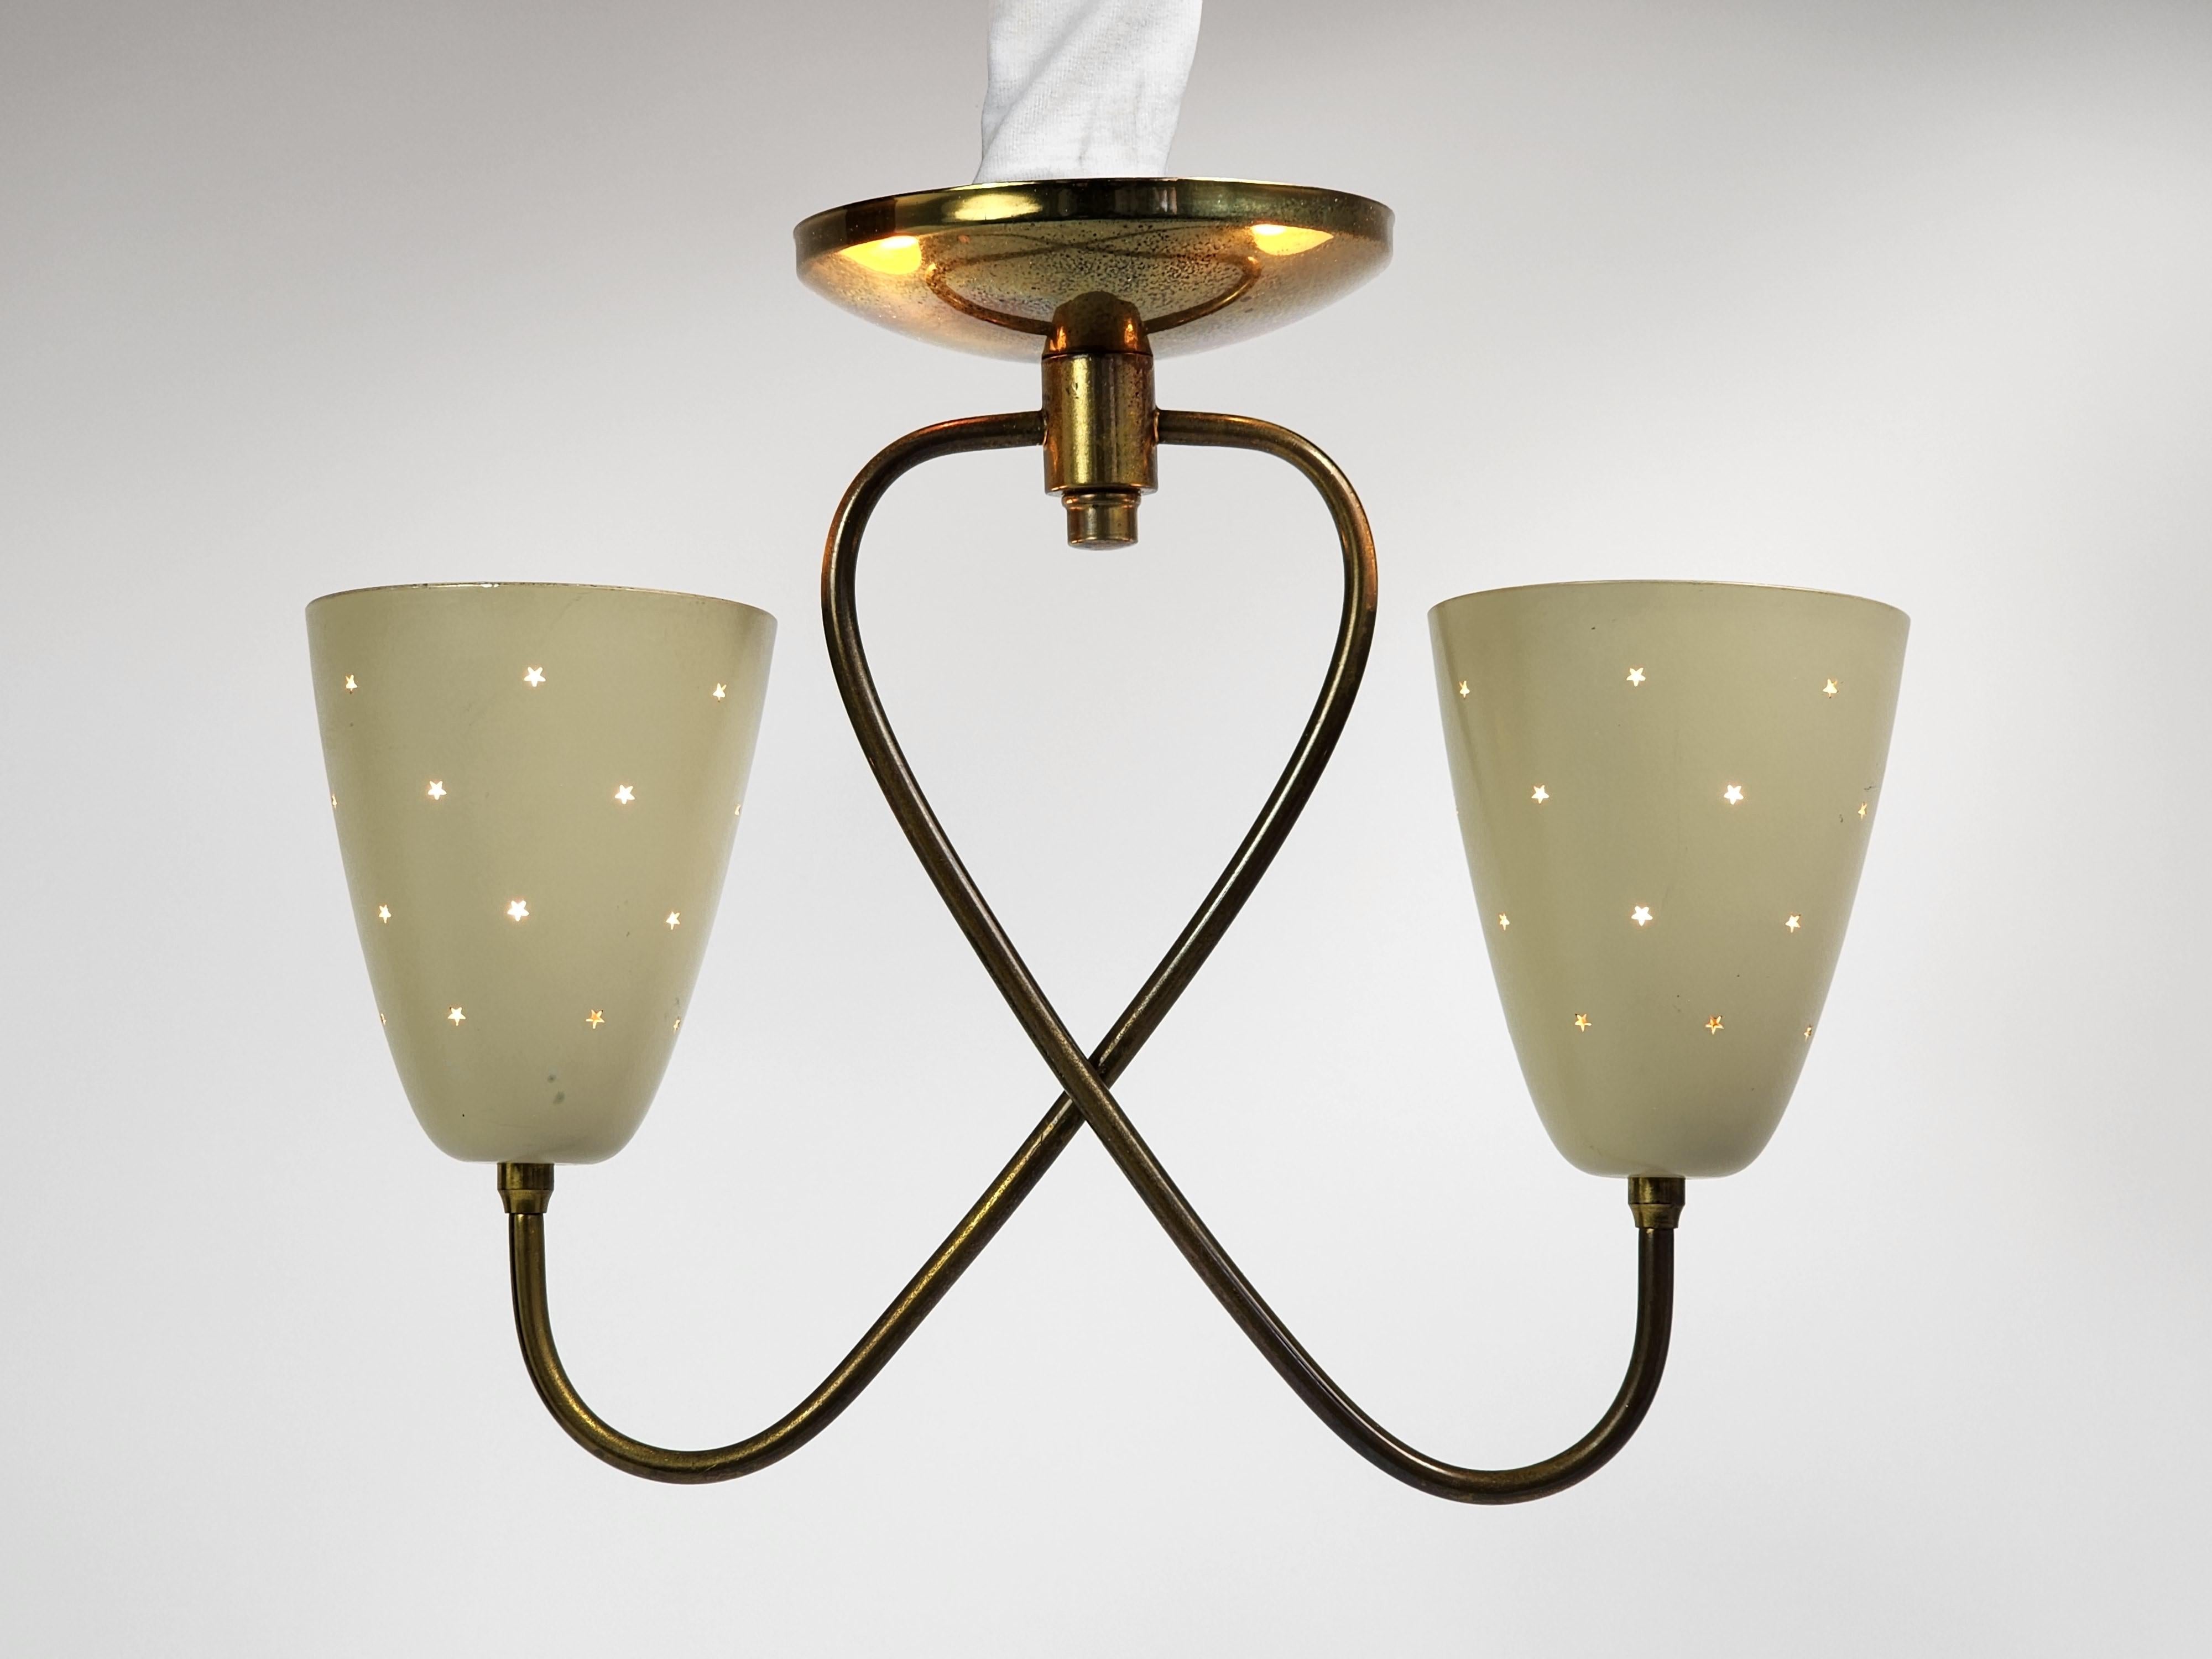 Gerald Thurston twin shade pendant for Lightolier, USA

Stars pierced motif enameled aluminium shade sitting on a brass structure. 

Contain two E26 size socket rated at 60 watt each. 

